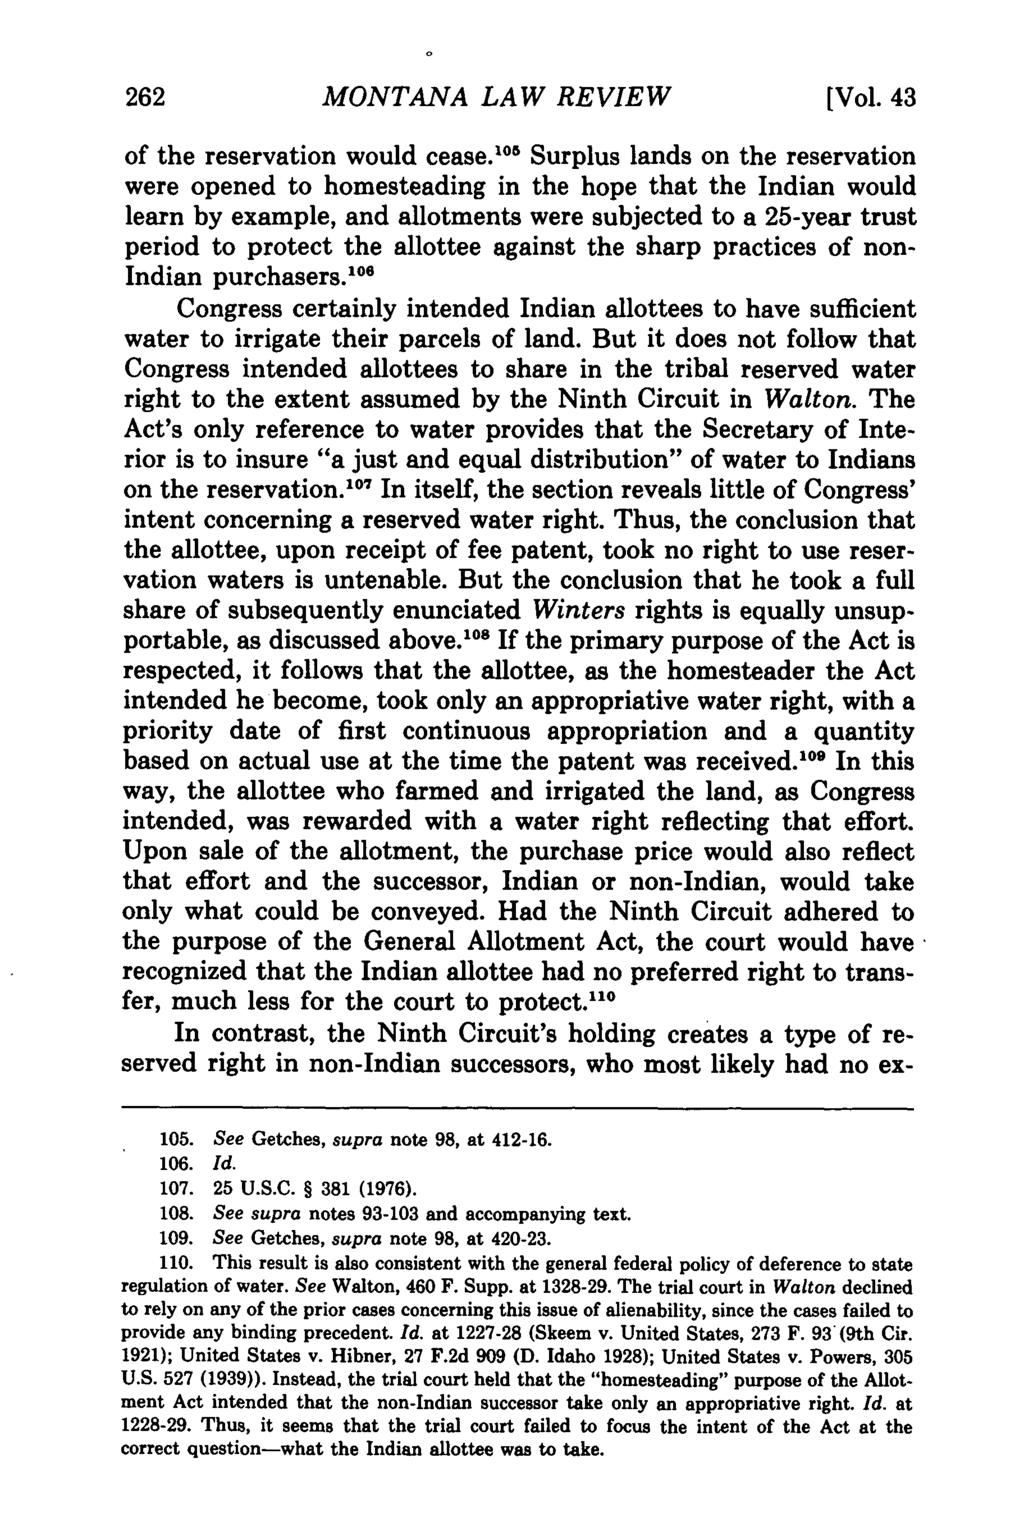 Montana Law Review, Vol. 43 [1982], Iss. 2, Art. 7 MONTANA LAW REVIEW [Vol. 43 of the reservation would cease.